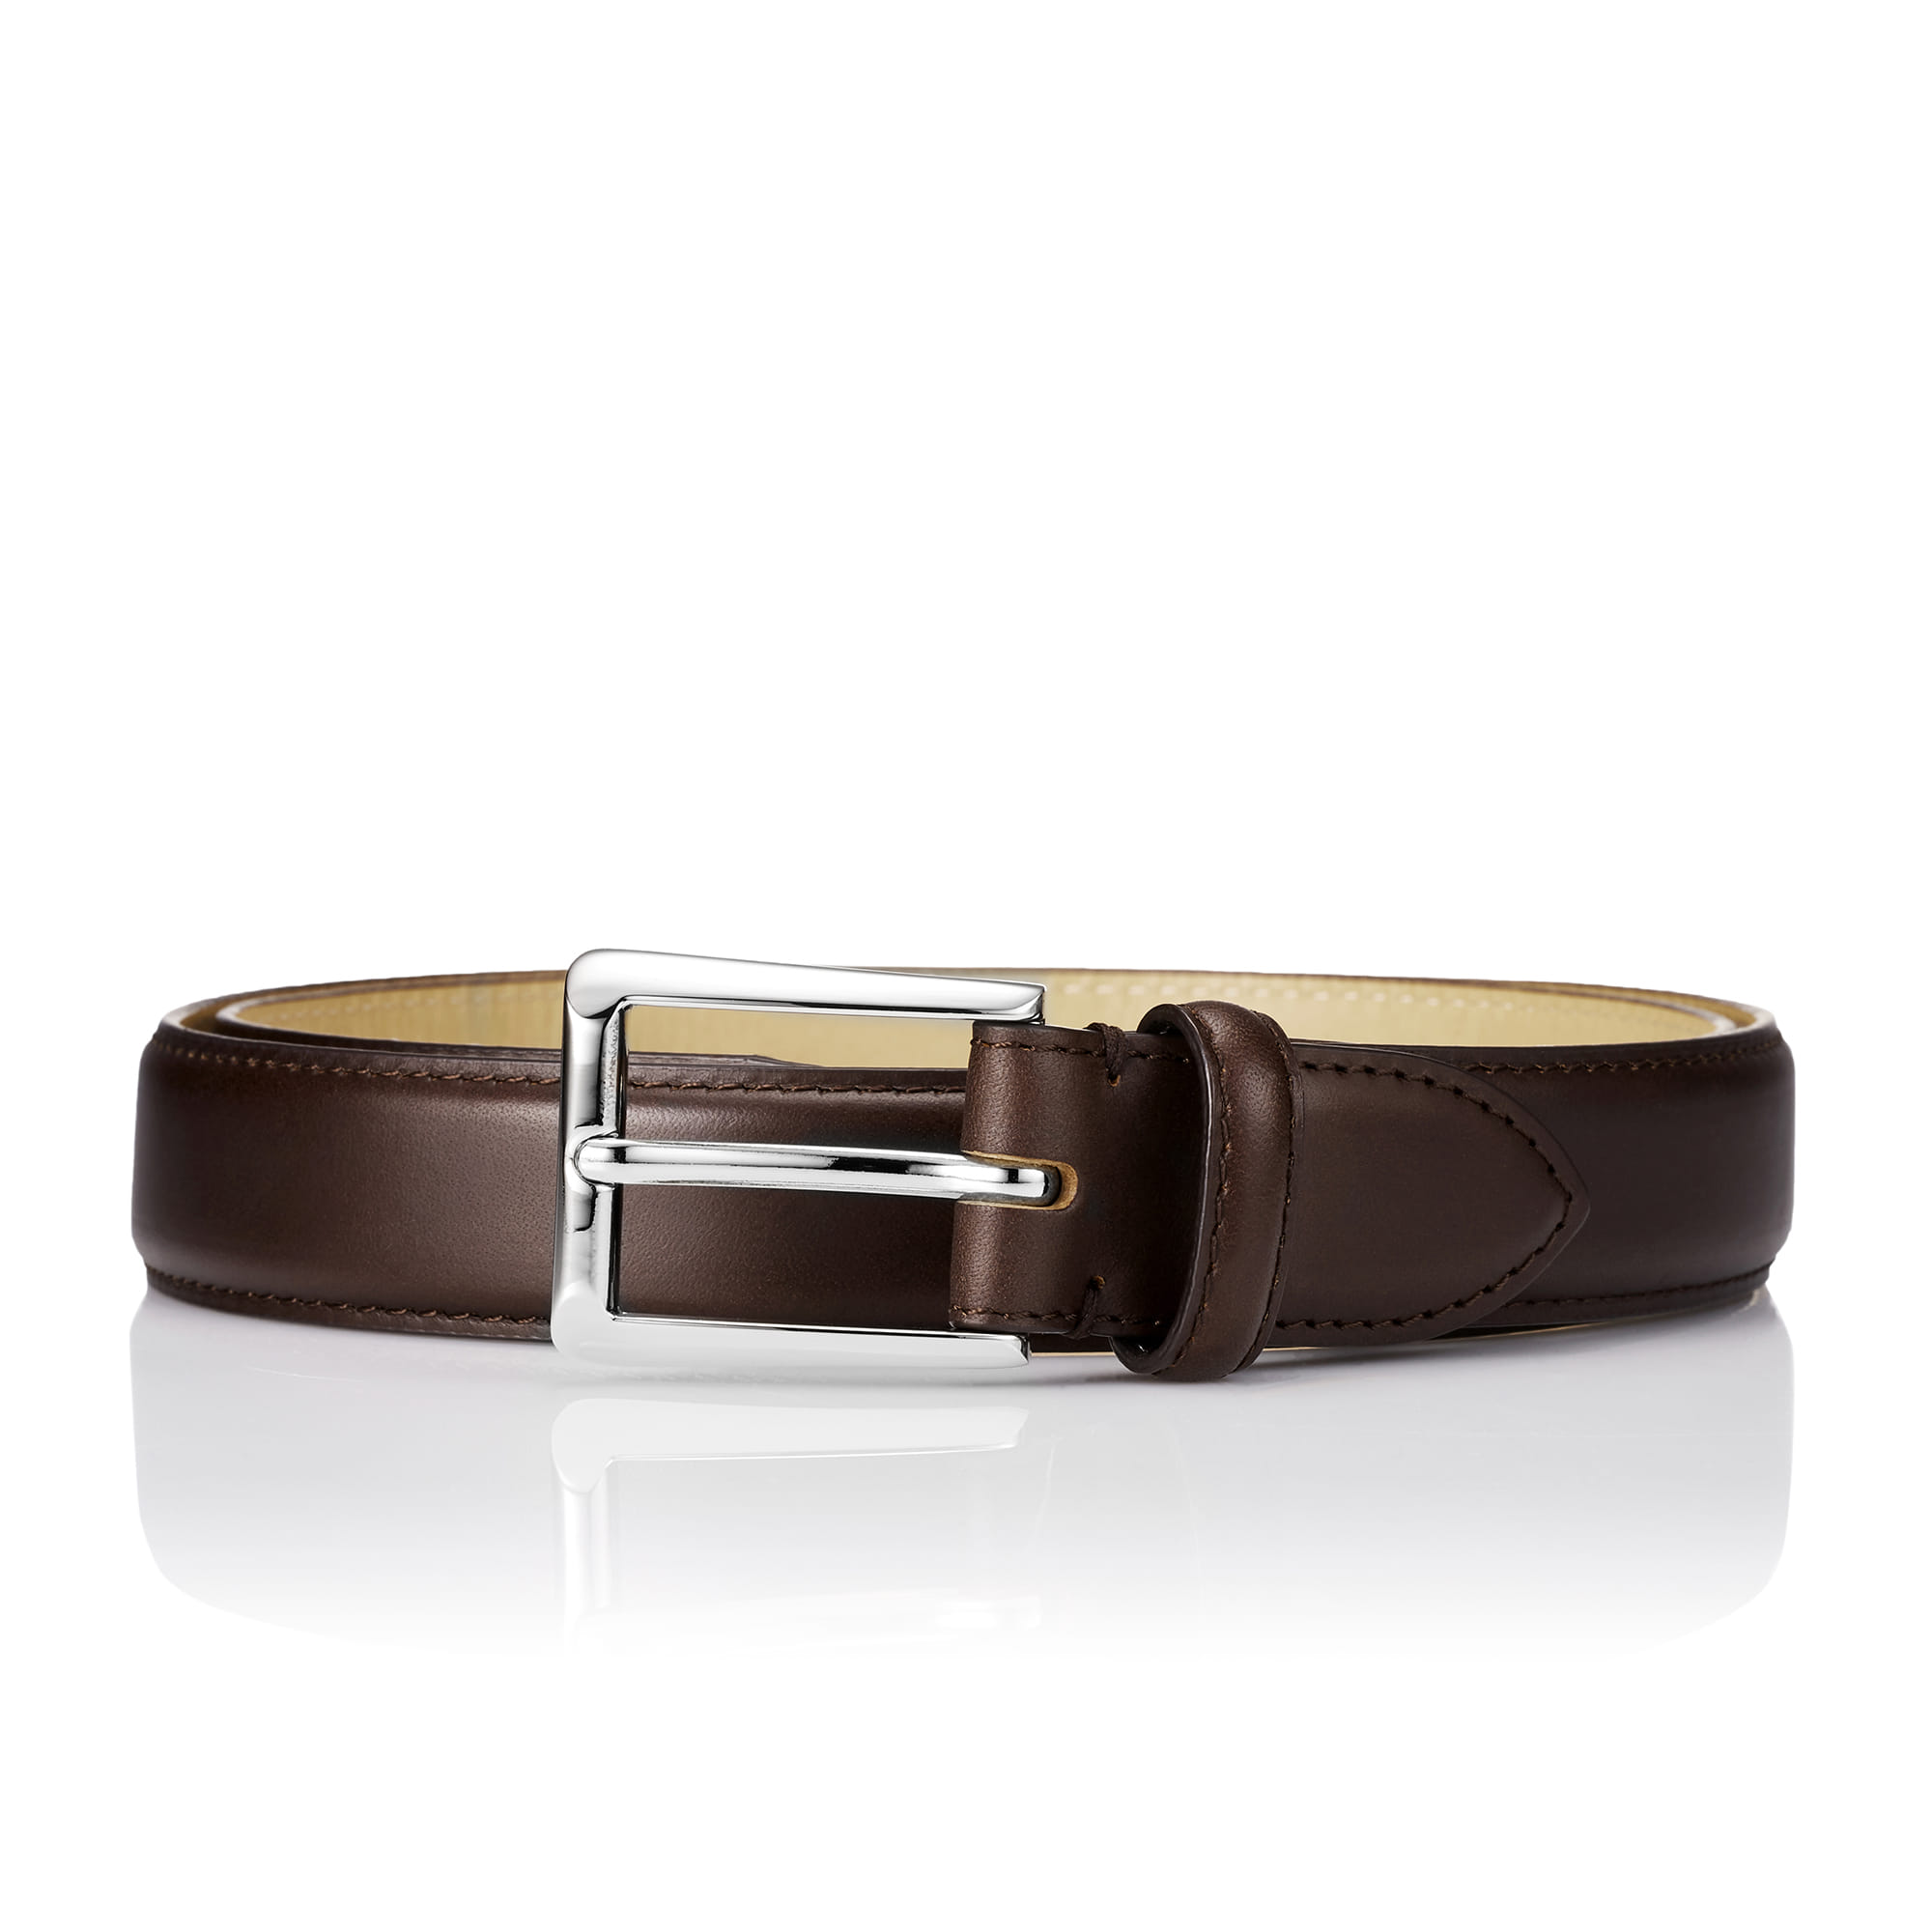 150 Classic Leather Belt - Brown